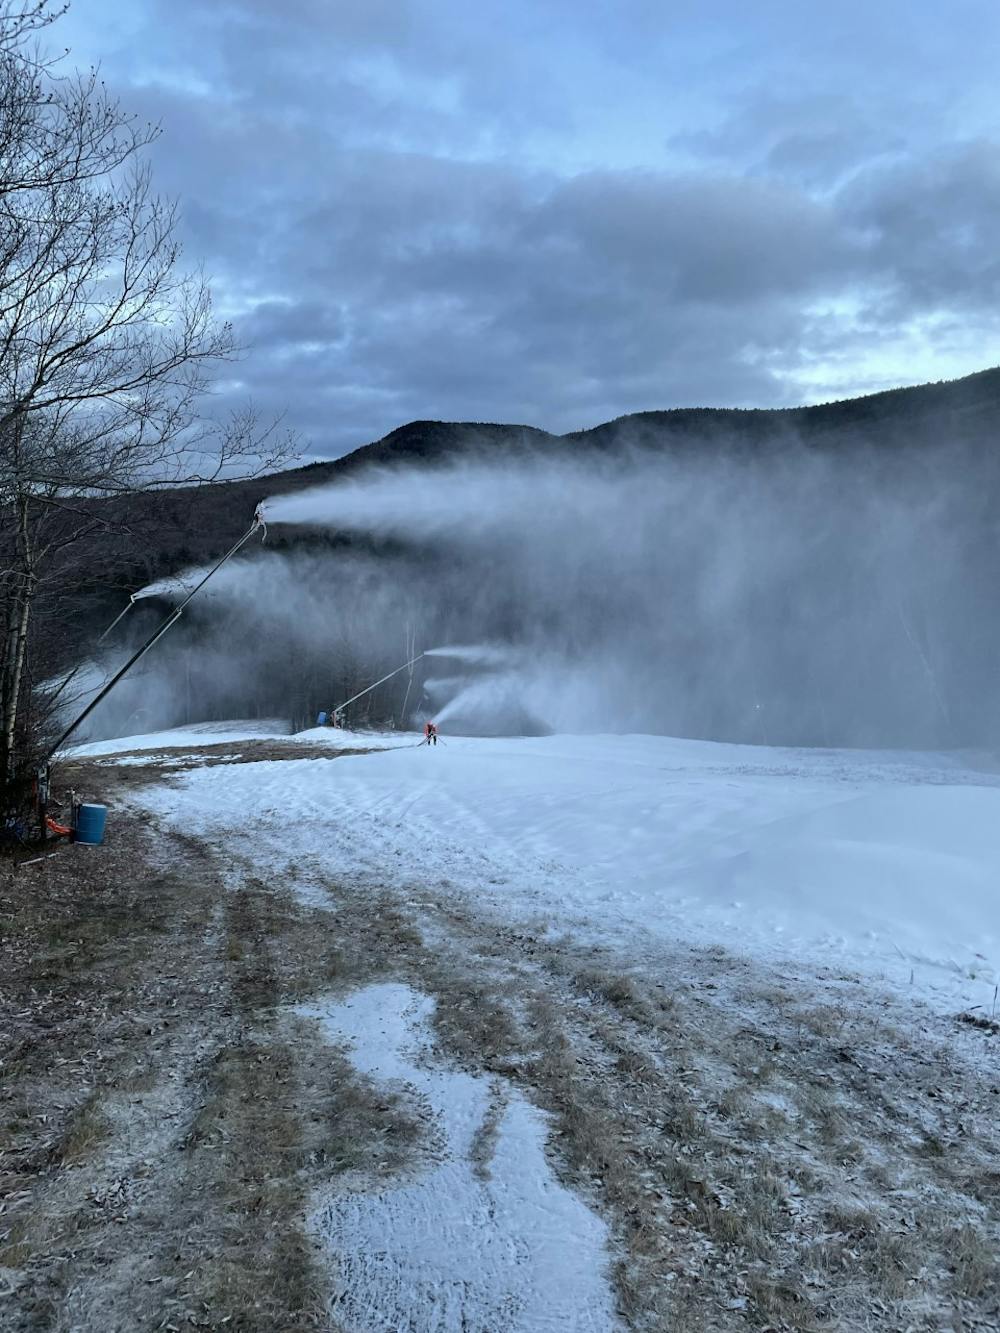 Snowmaking guns fire up at the Middlebury Snowbowl, which faced unseasonably warm weather and low snowfall early this winter